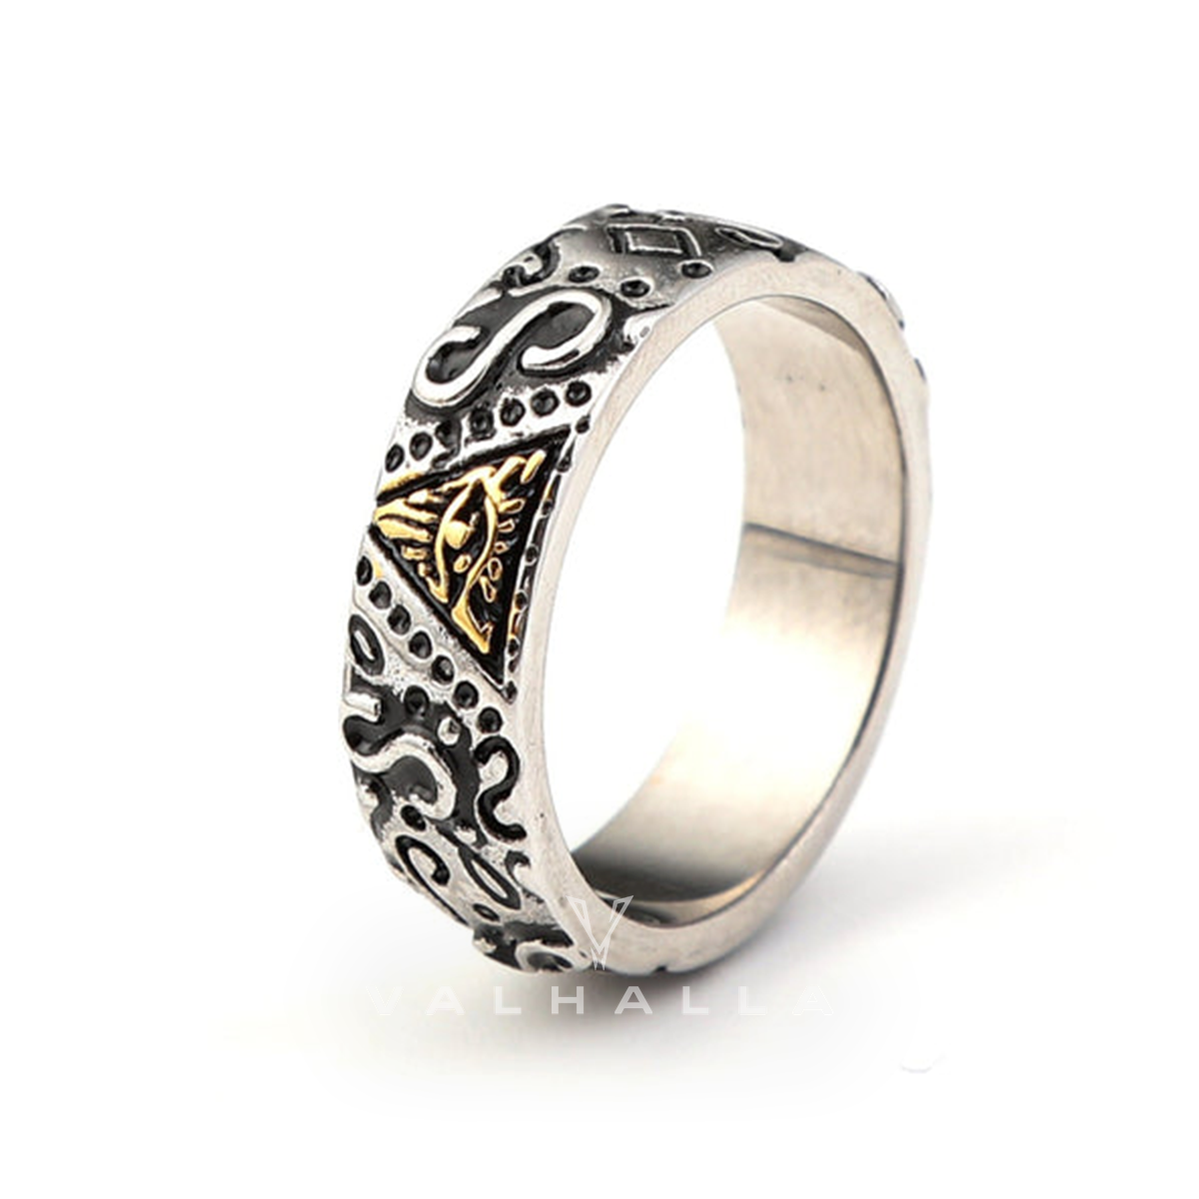 Triangle Eye of Providence Stainless Steel Masonic Ring